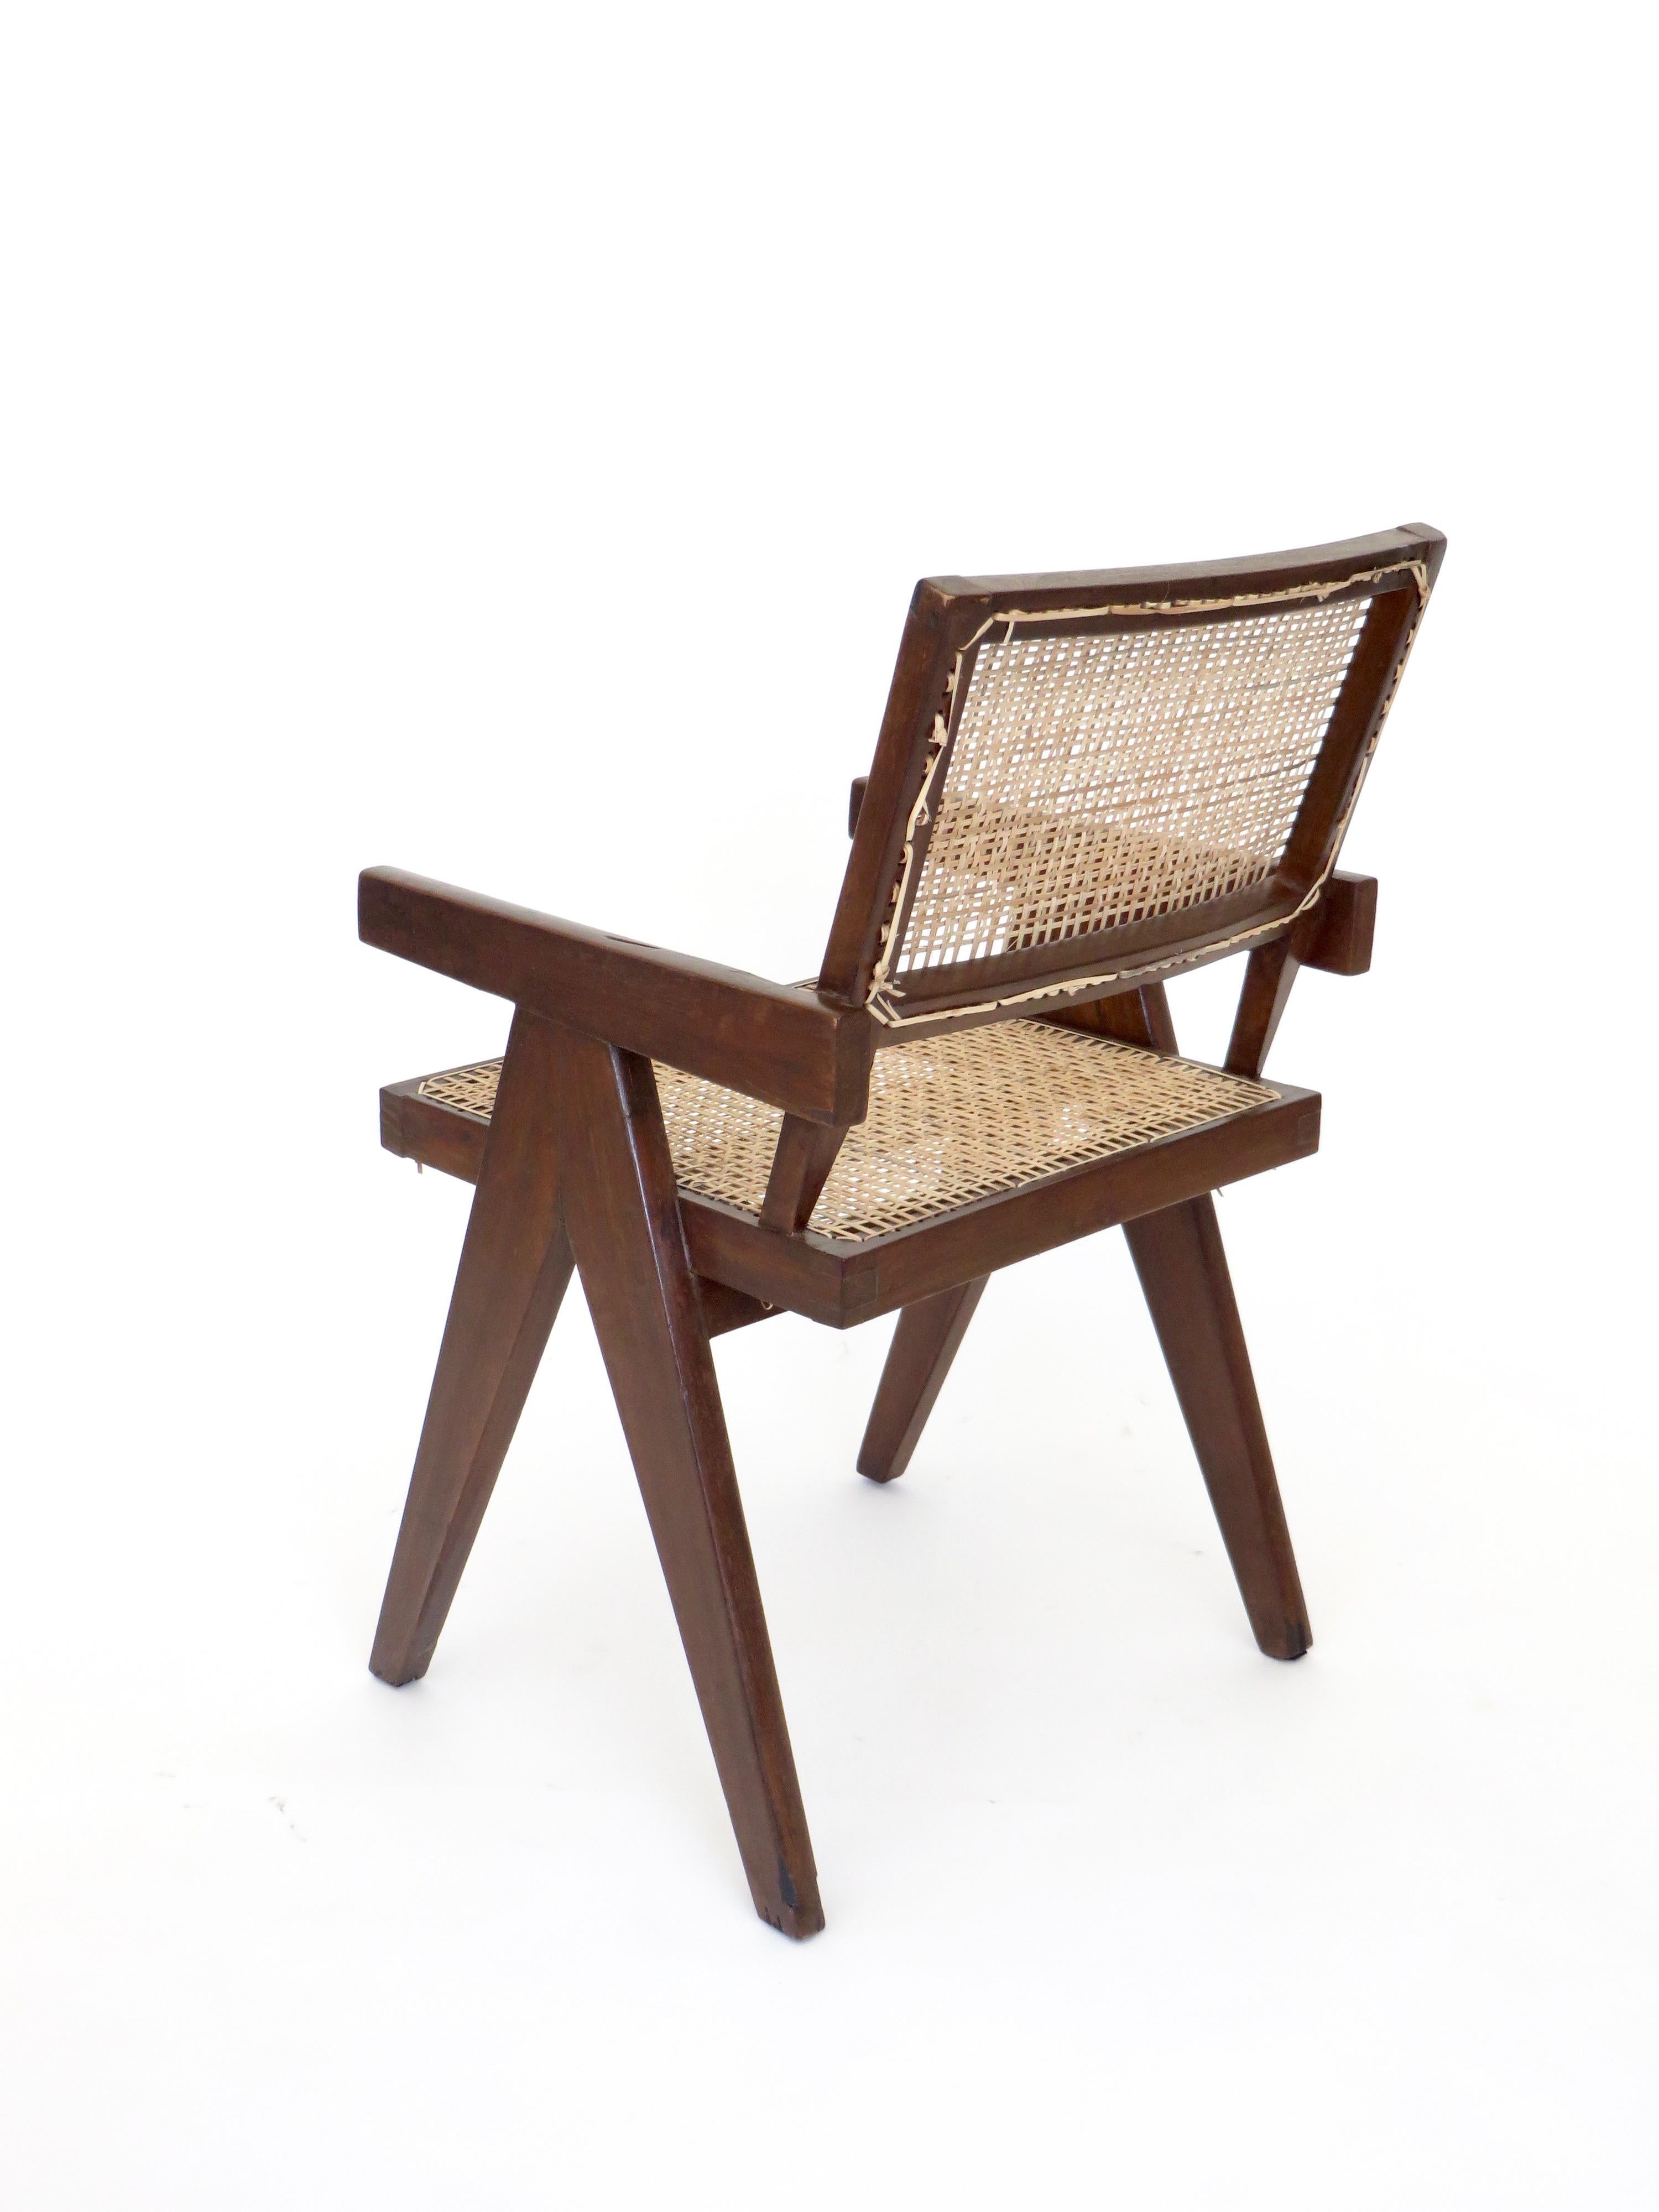 Mid-20th Century Pierre Jeanneret Teak and Cane Office Armchair from Chandigarh 